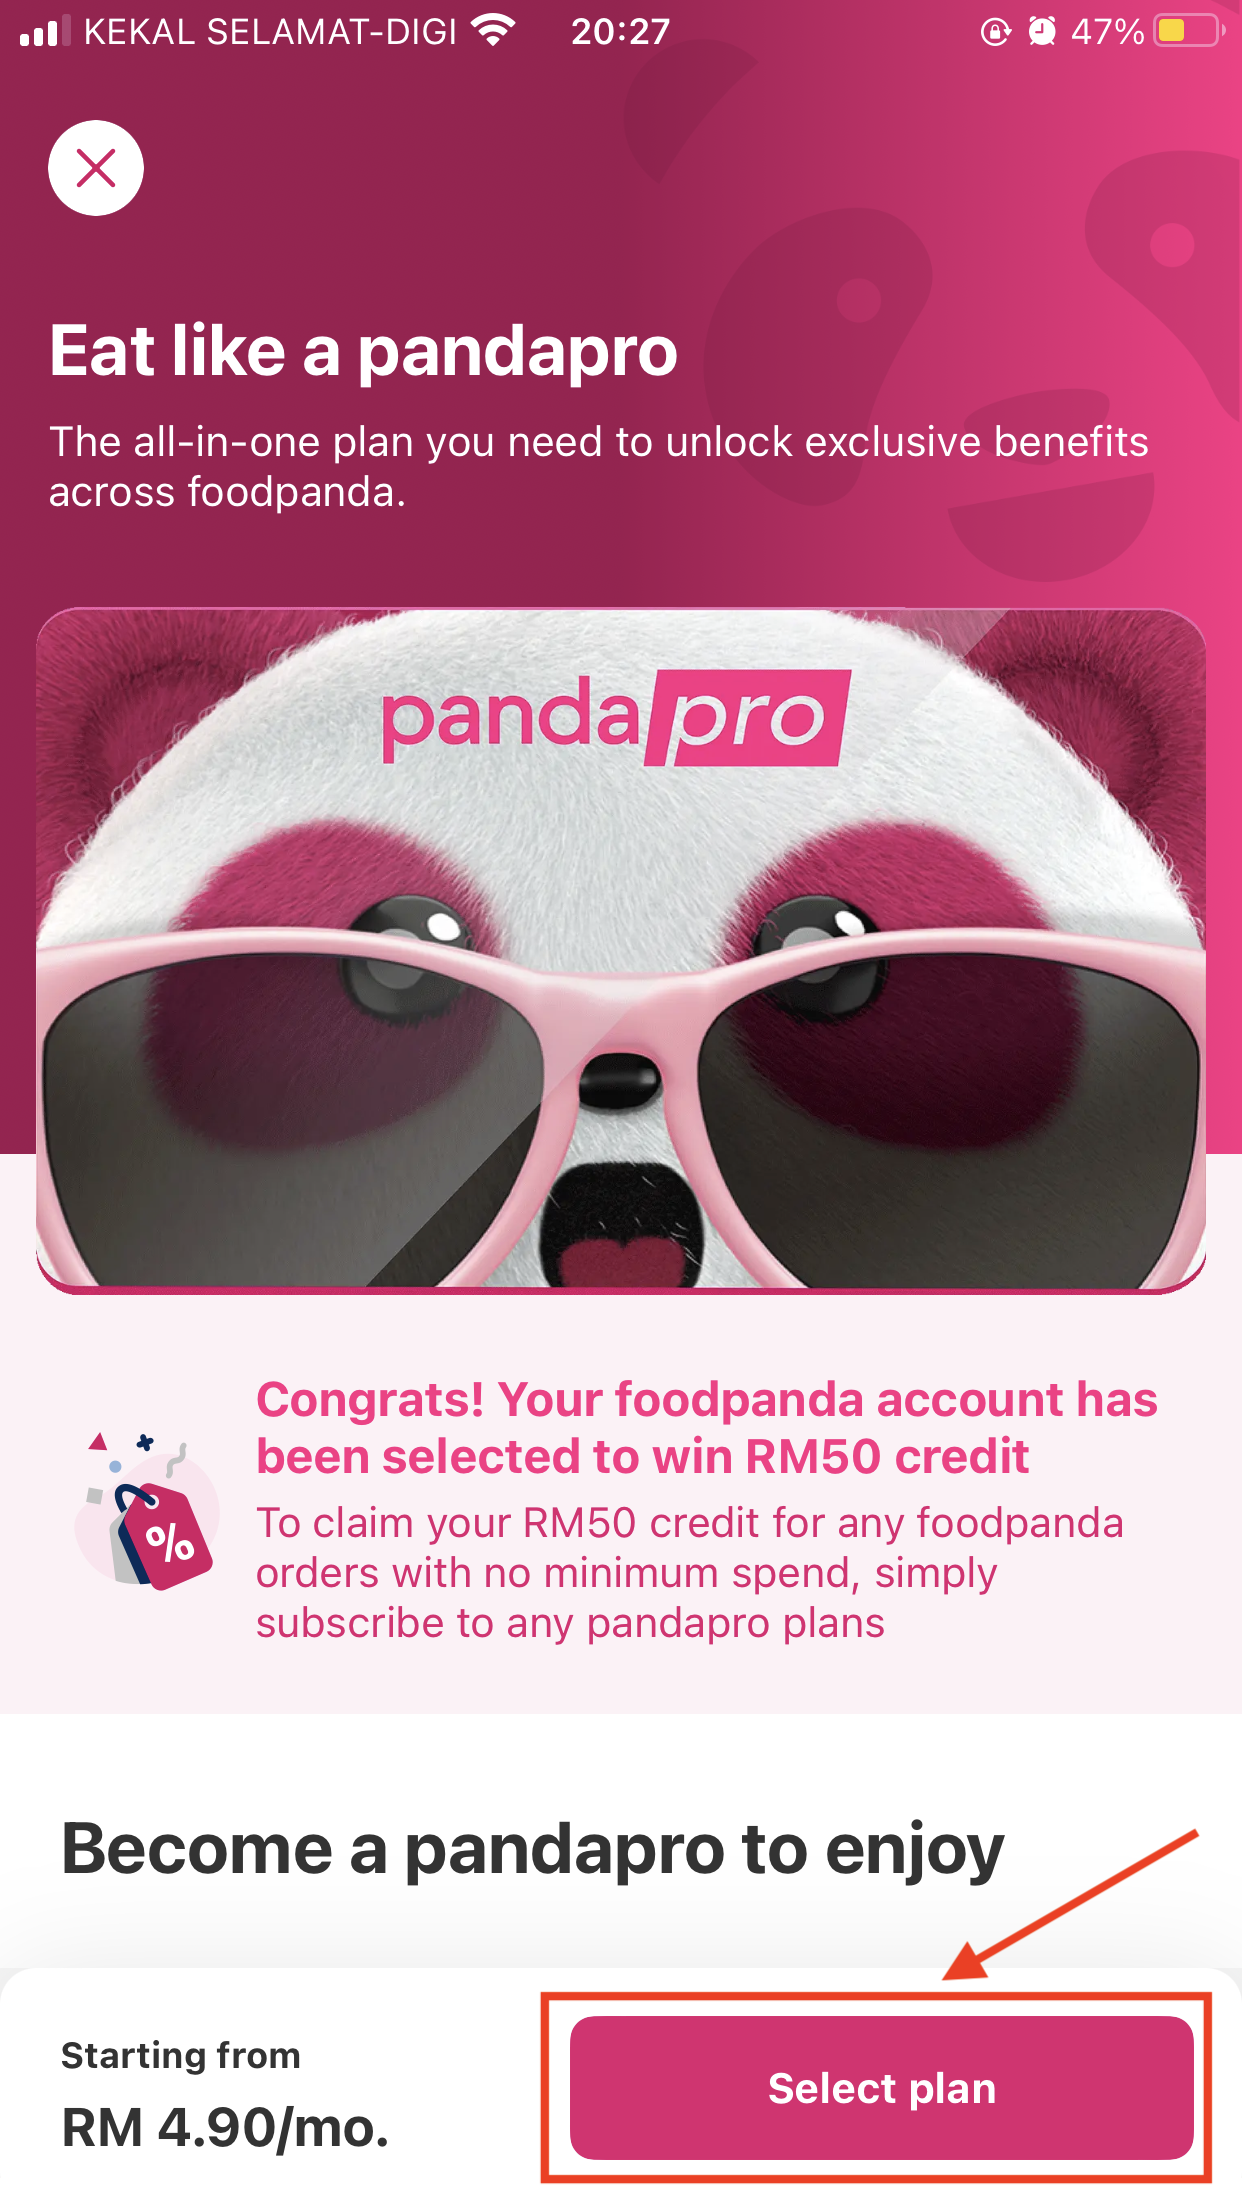 Life sucks with inflation? Let pandapro save you up to rm50 monthly